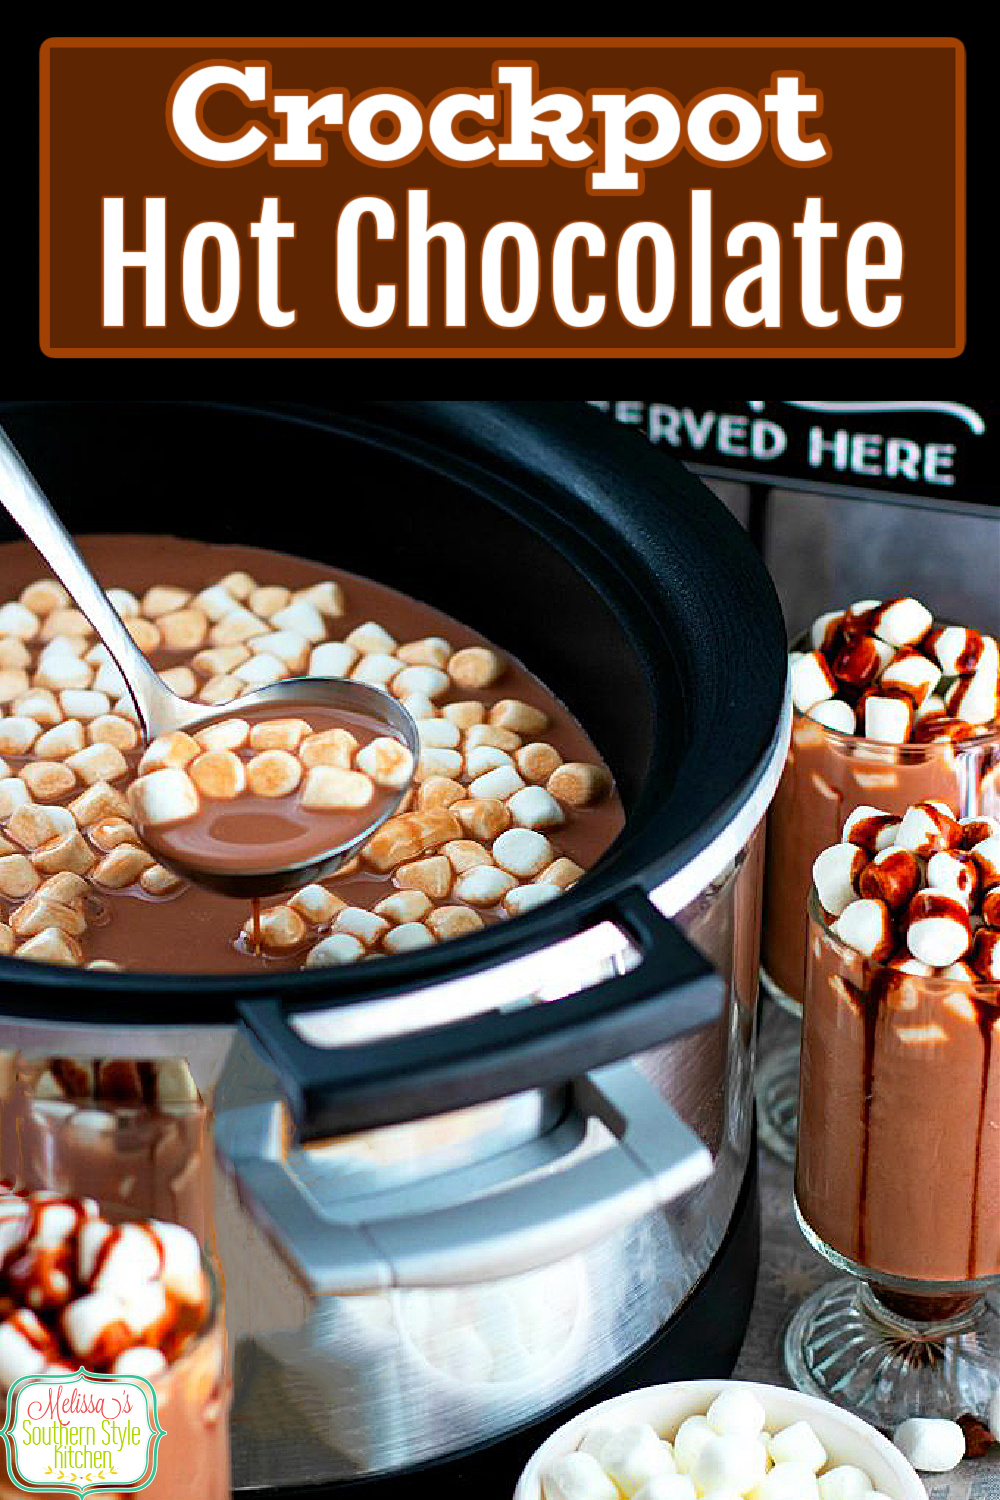 Enjoy a steamy cup of this Crockpot Hot Chocolate for a chilly day sweetfix #hotchocolate #crockpothotchocolate #slowcookerhotchocolate #hotcocoarecipes #chocolaterecipes #drinks #southernecipes